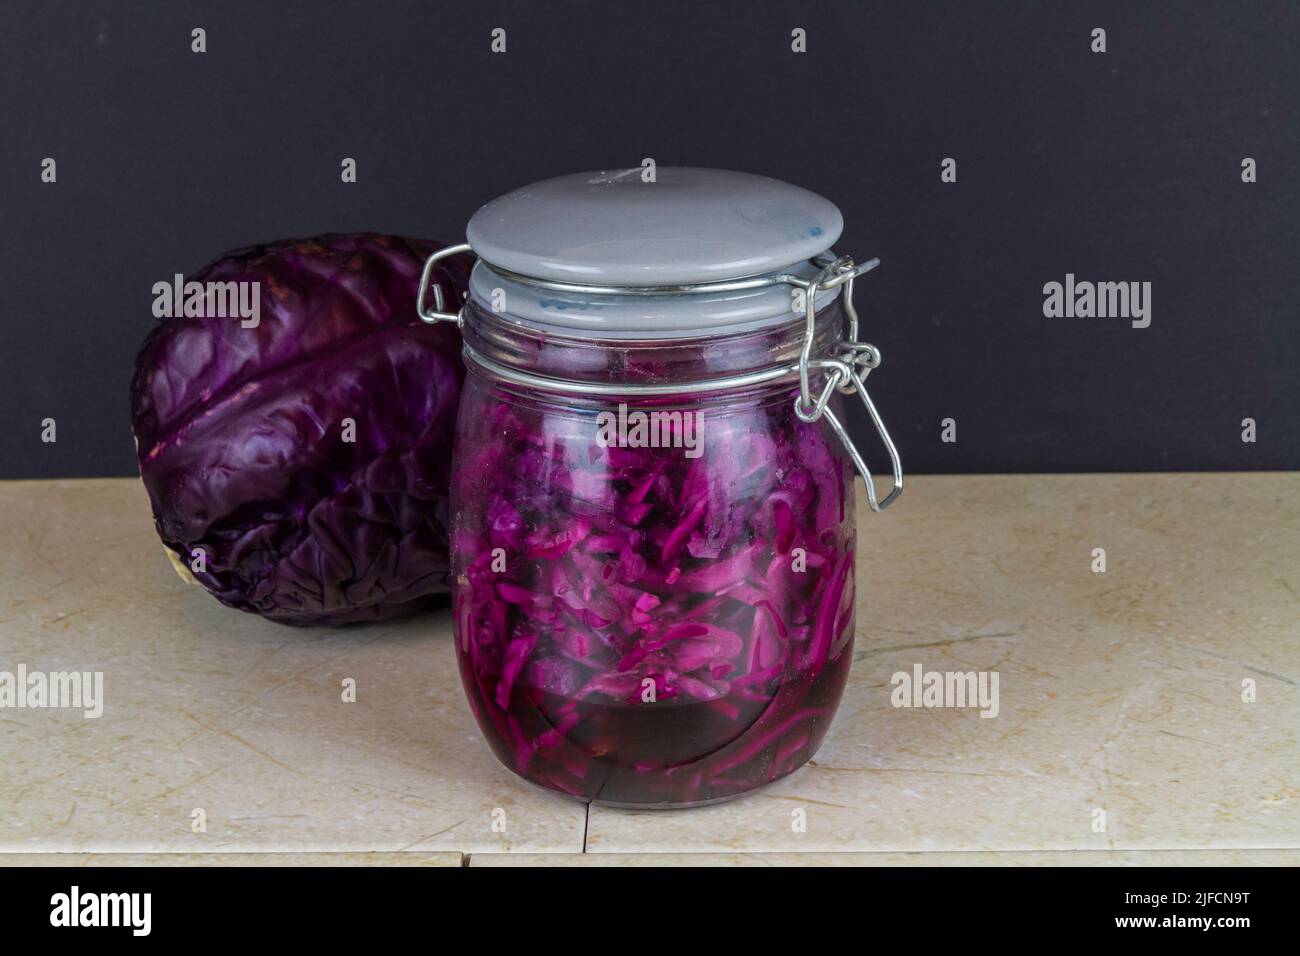 Jar of freshly made sauerkraut with whole red cabbage behind, landscape. Stock Photo